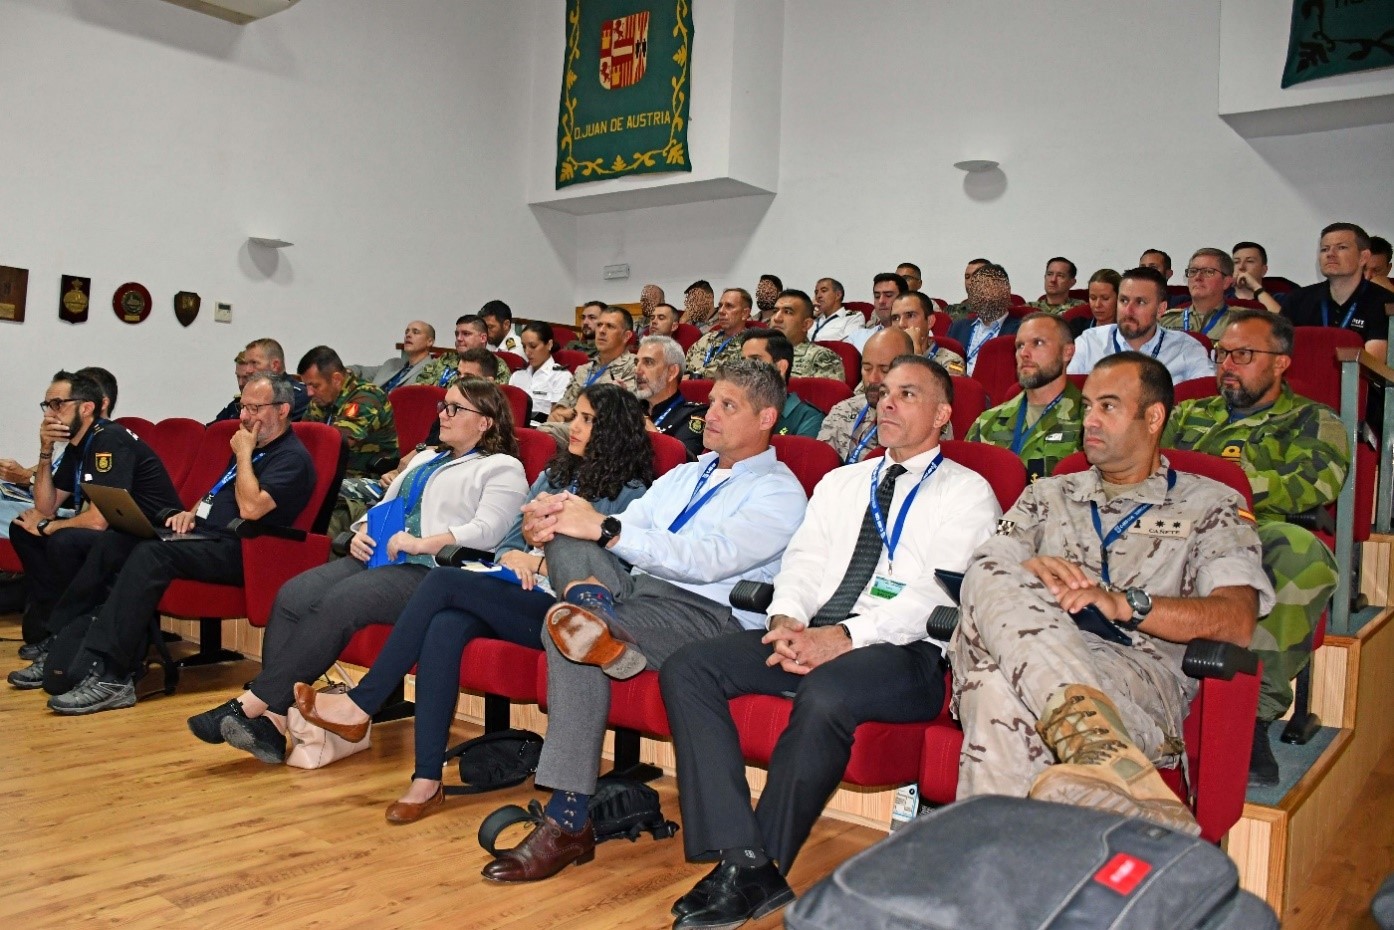 Attendees at one of the presentations